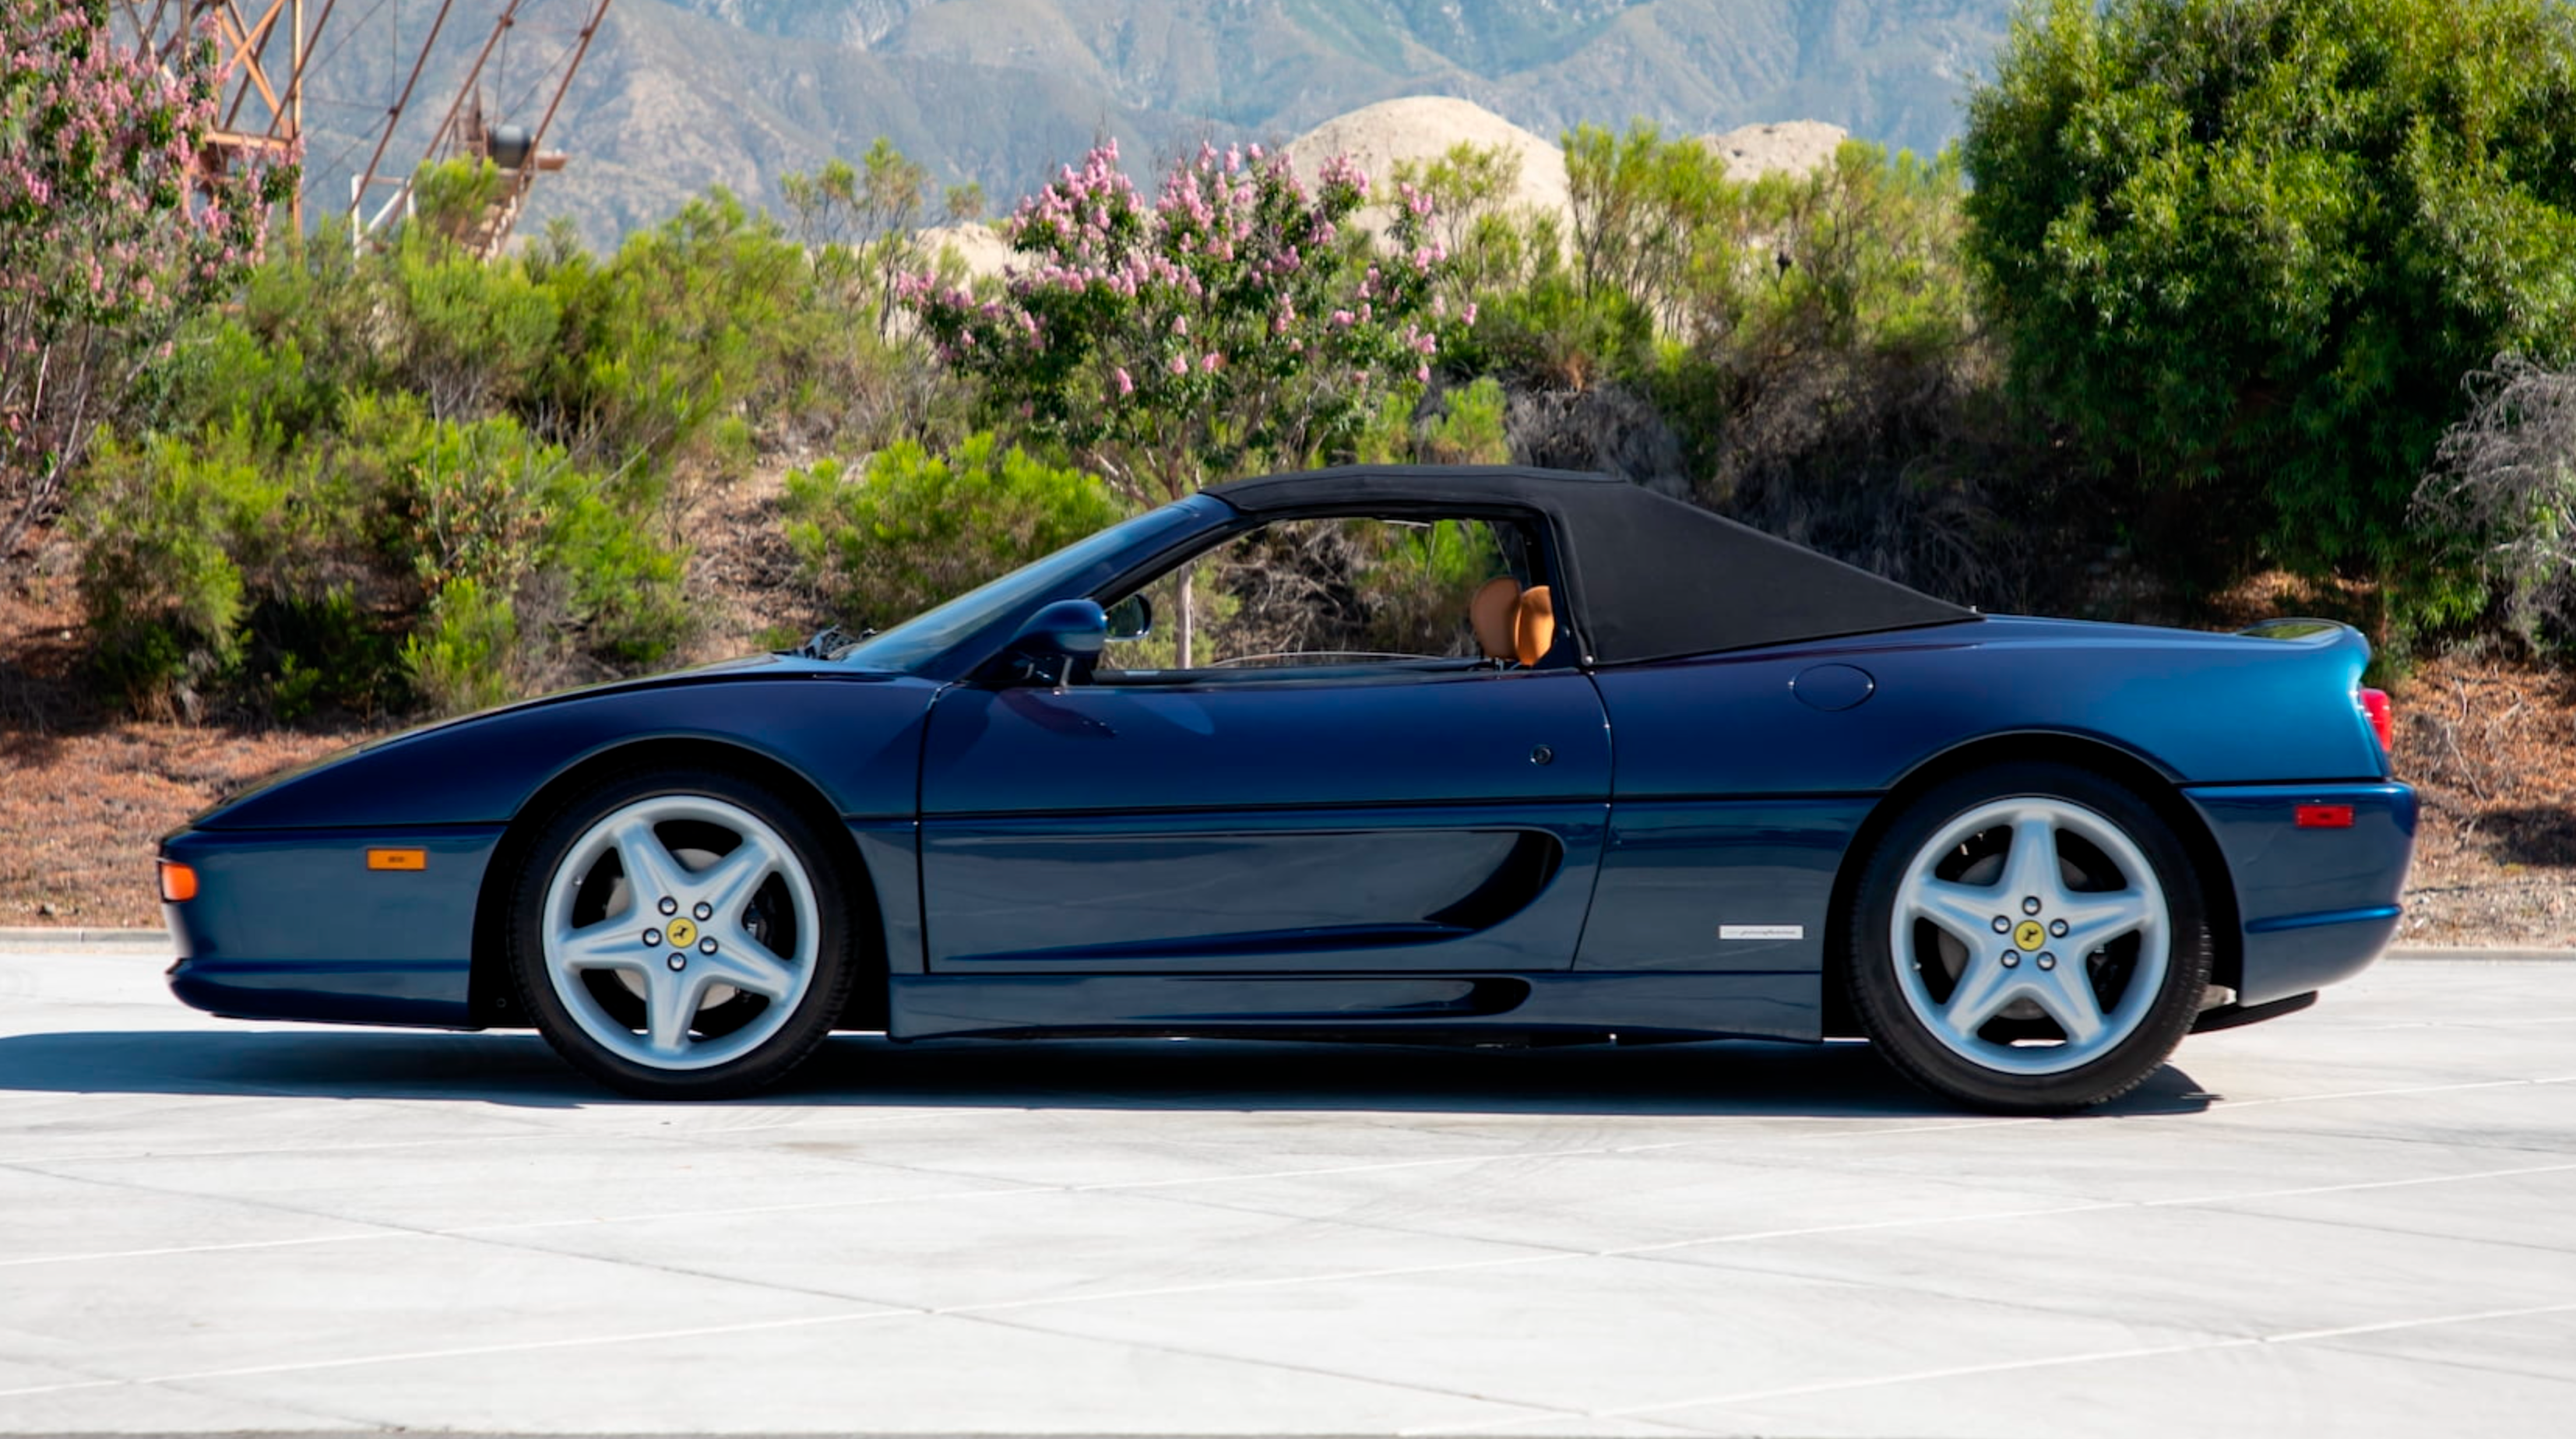 Our top 10 best [used] exotic sports cars for under $100k